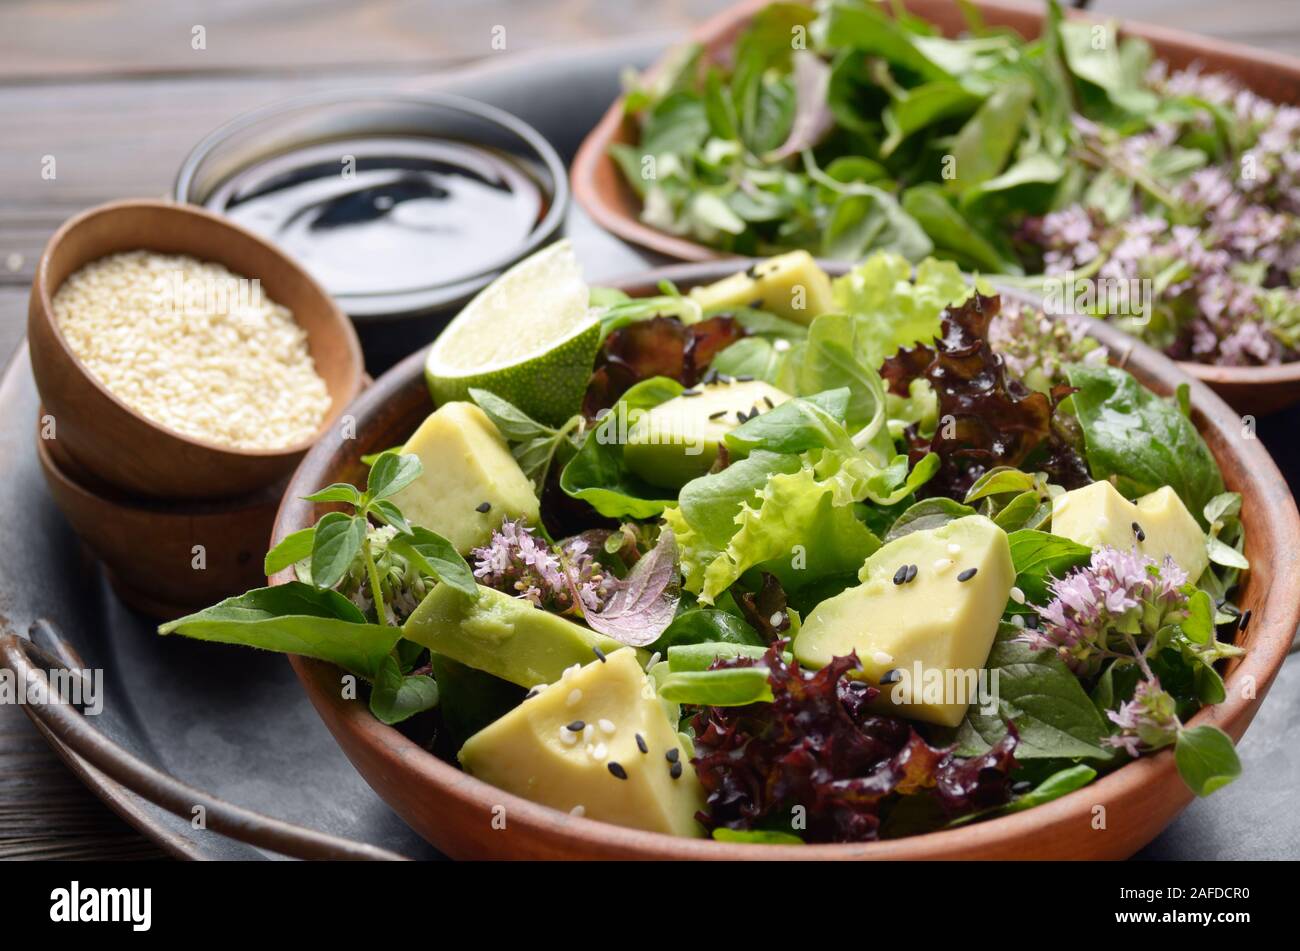 Clay dish with salad of avocado, green and violet lettuce, lamb's lettuce and oregano flowers on slate stone tray with soy sauce lime and sesame aside Stock Photo